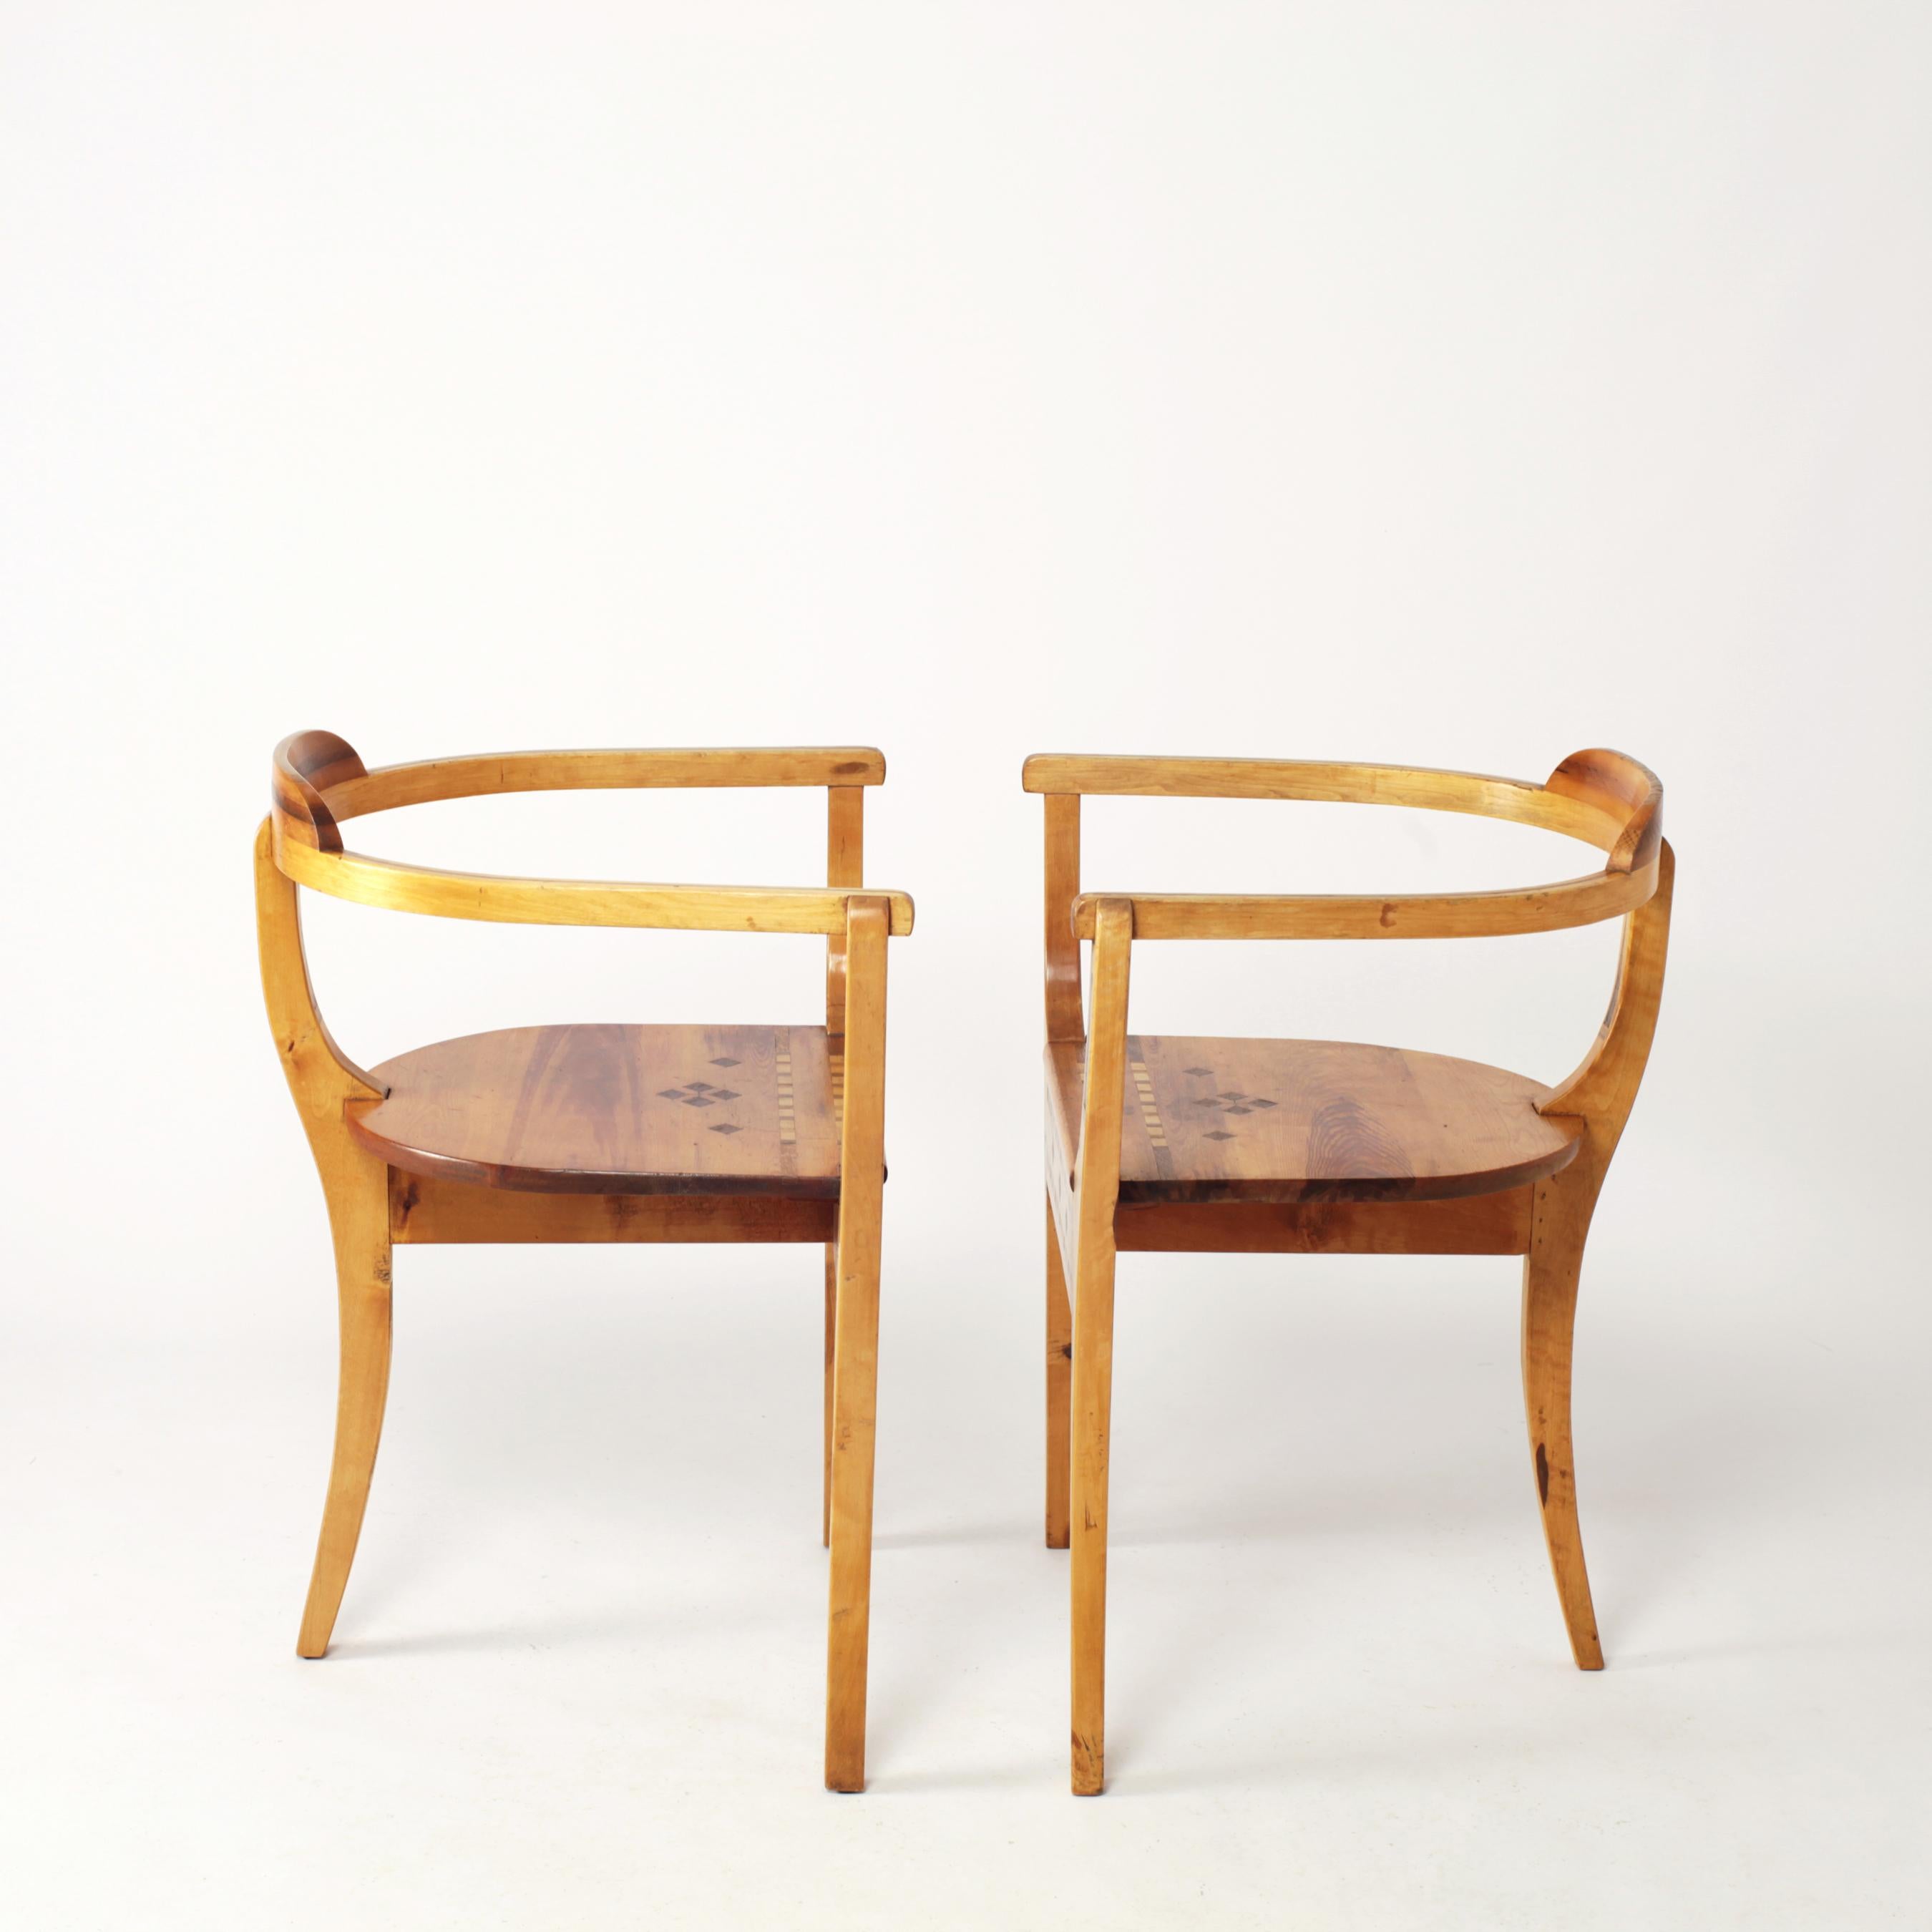 Swedish Pair of Handcrafted Pinewood Armchairs, Sweden, 1942